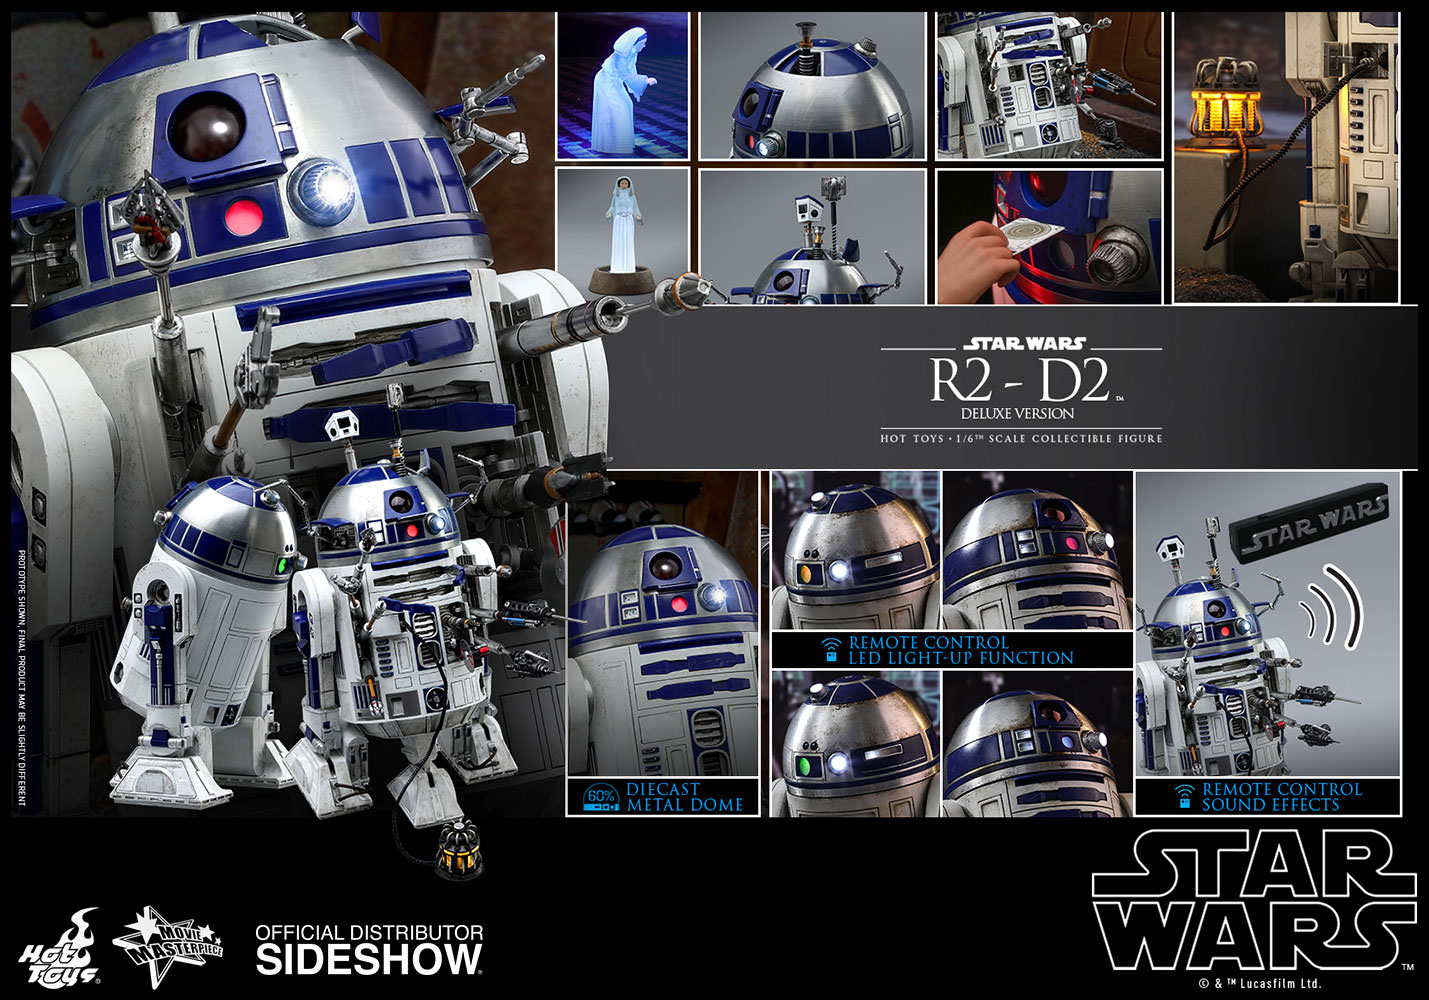 https://www.sideshow.com/storage/product-images/903742/r2-d2-deluxe-version_star-wars_gallery_5c4b9f429cc65.jpg